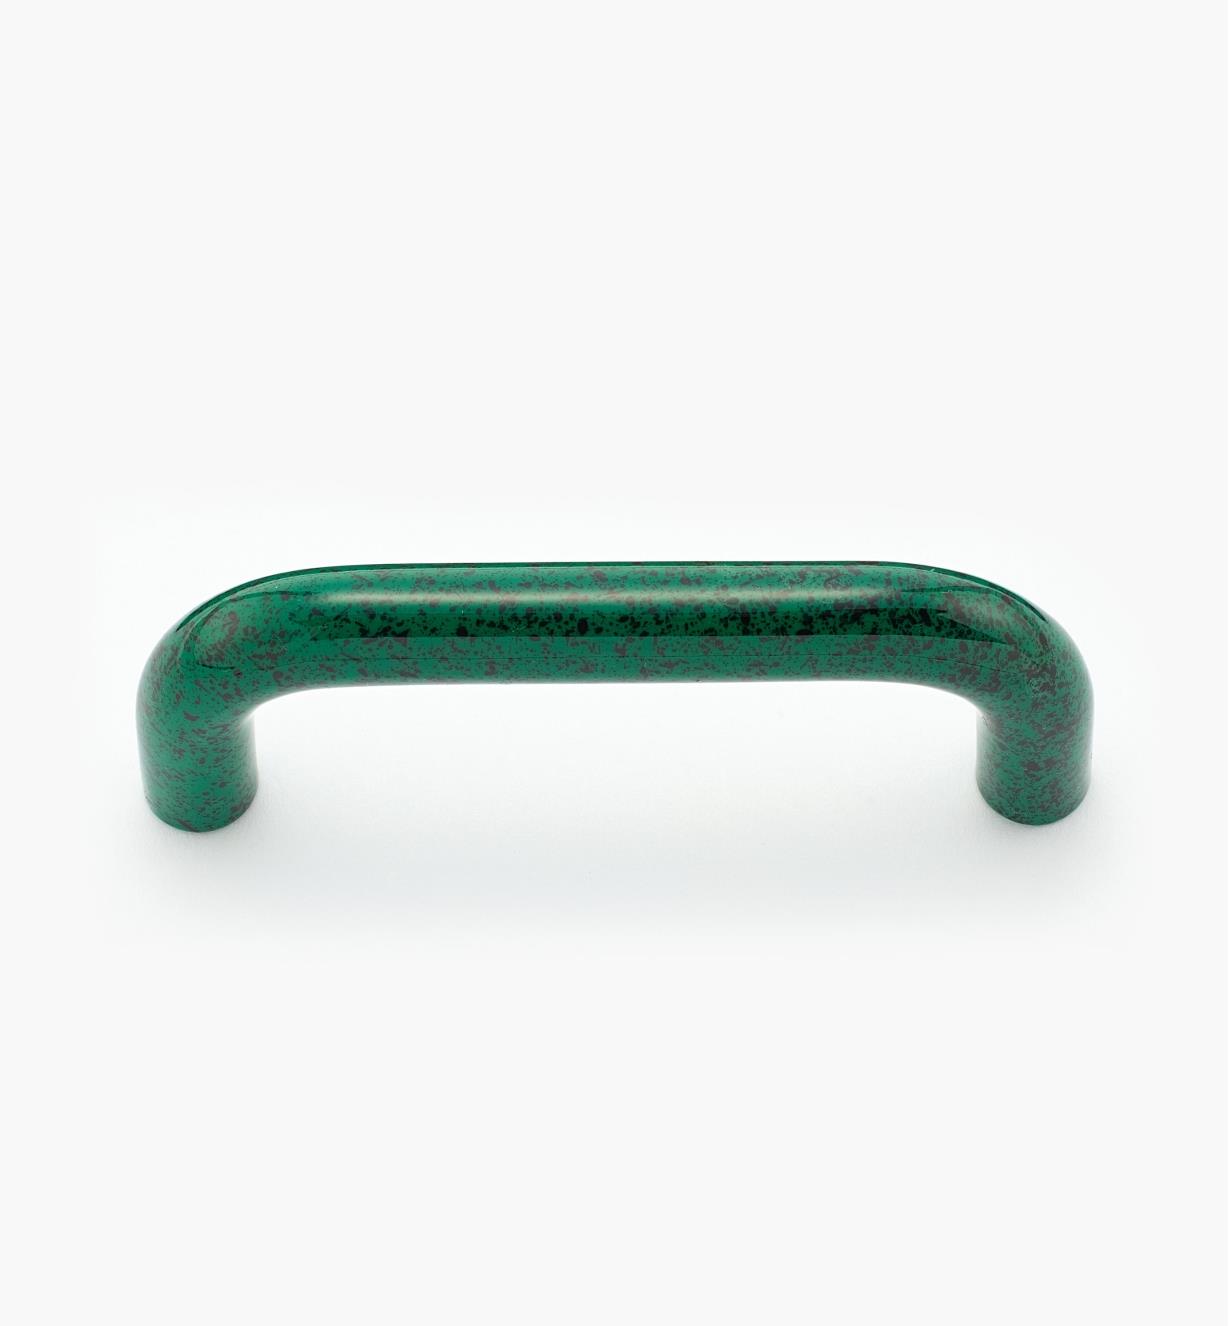 00W3971 - 2 7/8" Marbled Green Wire Pull